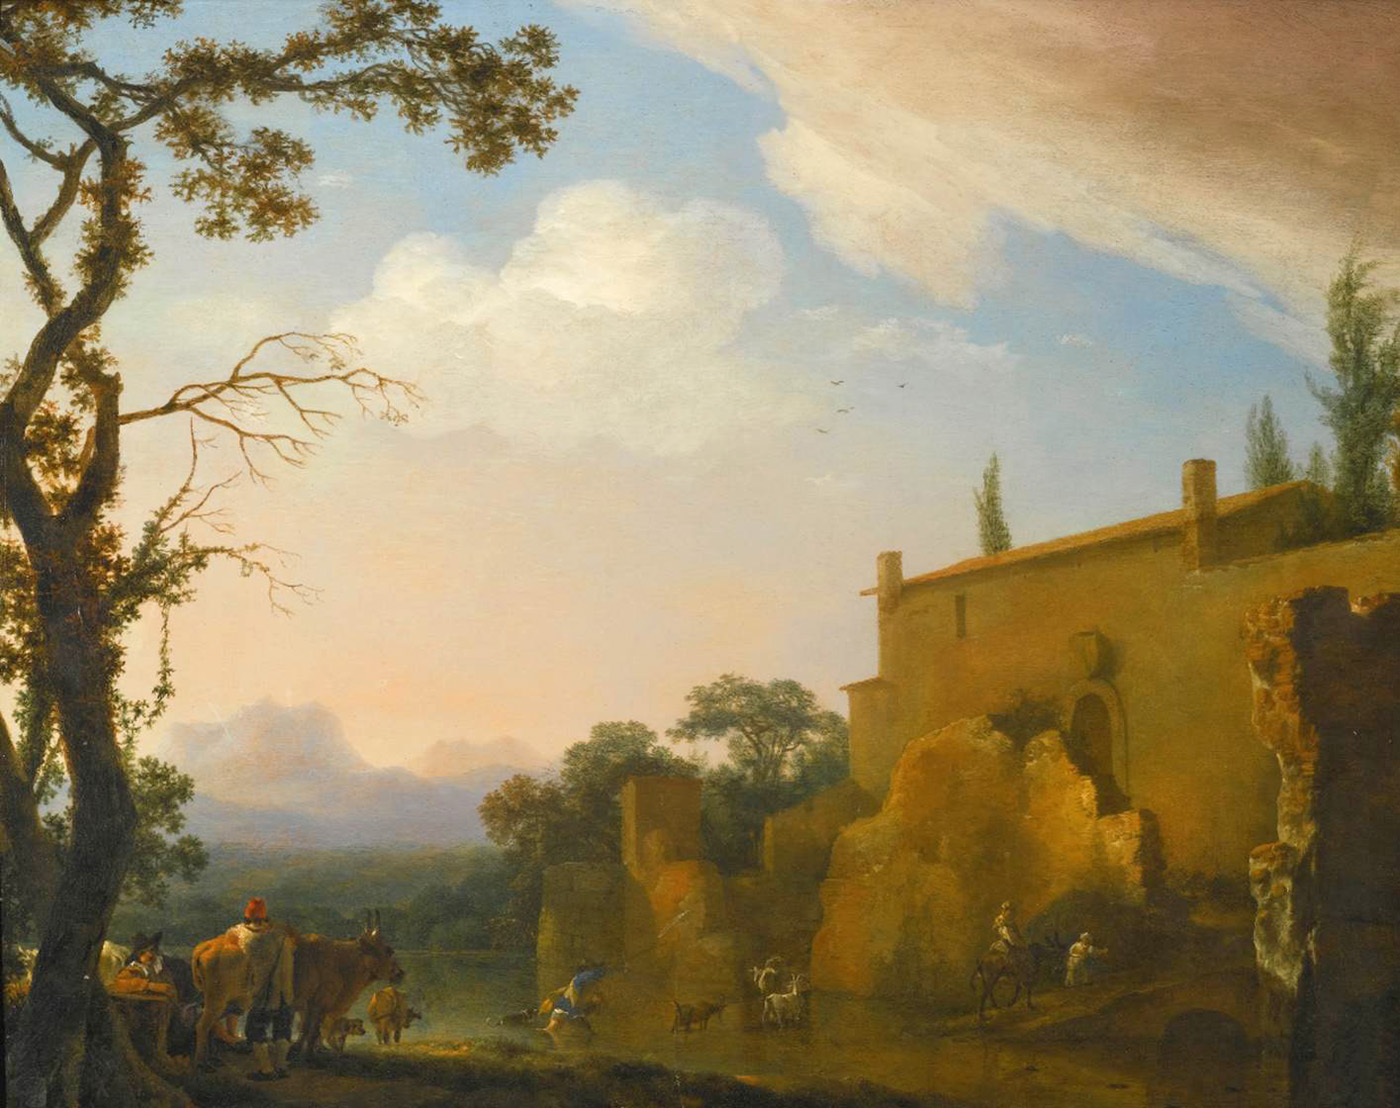 peasants and animals fording a river